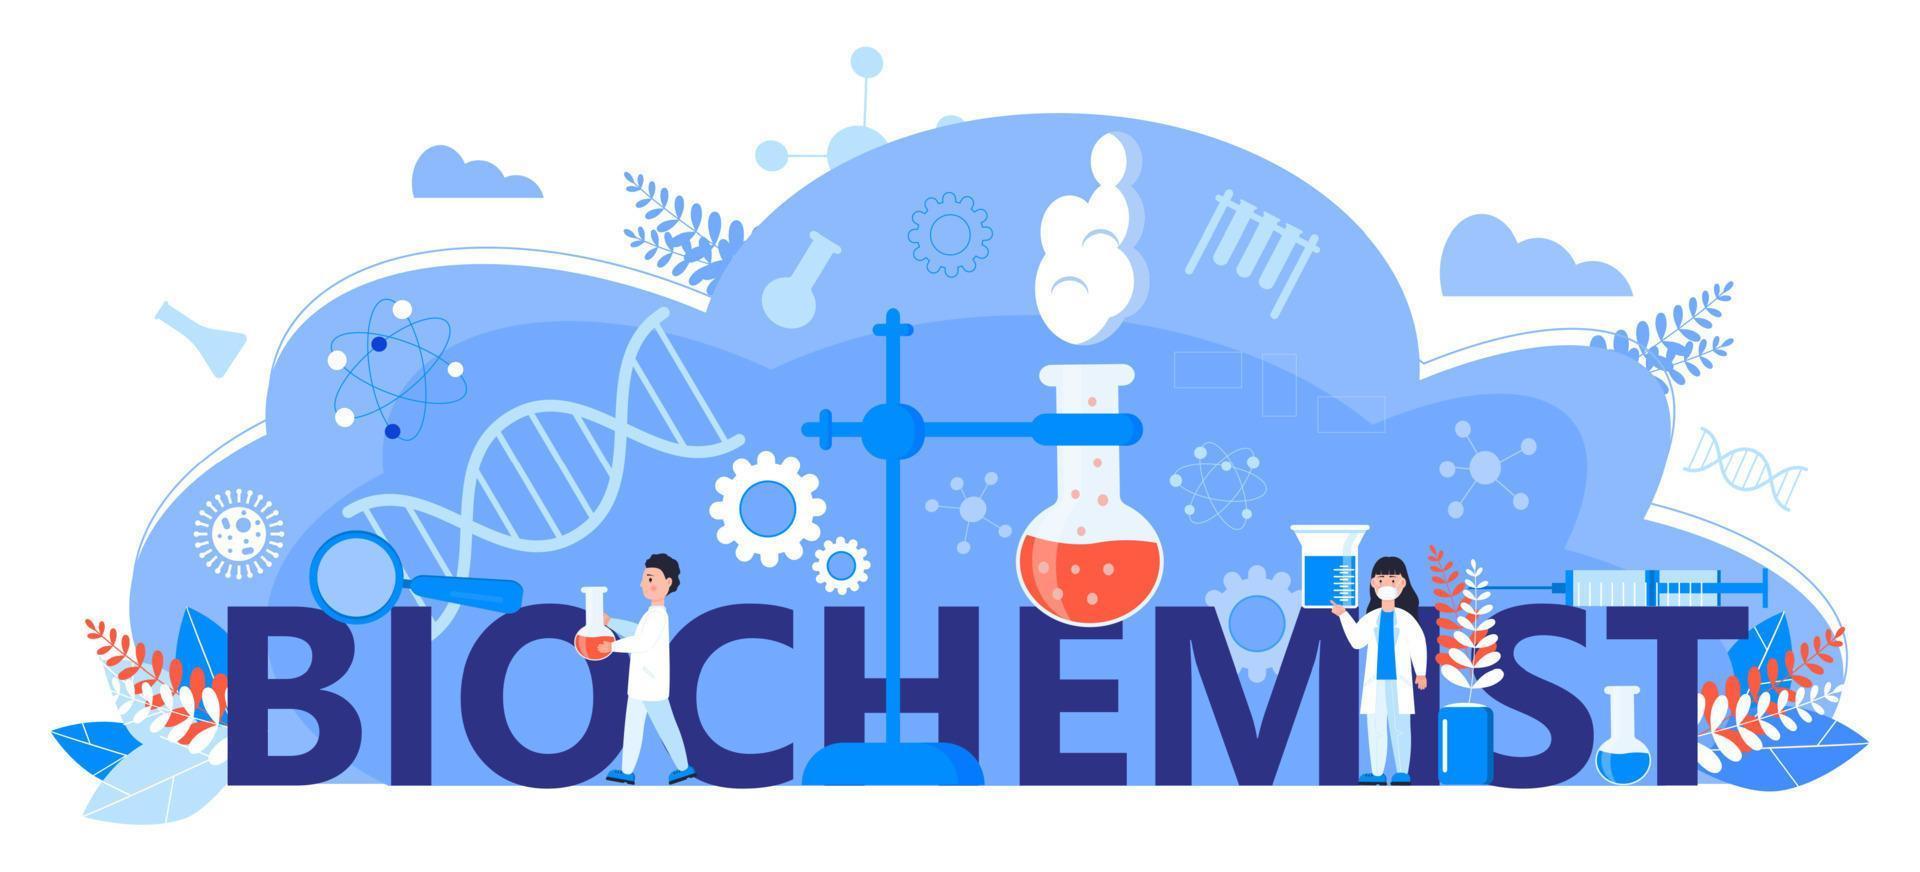 Biochemist online learning concept. Biological technology, biotechnology science vector. Scientists study microorganisms in microscope. Medical research illustration for homepage, banner. vector